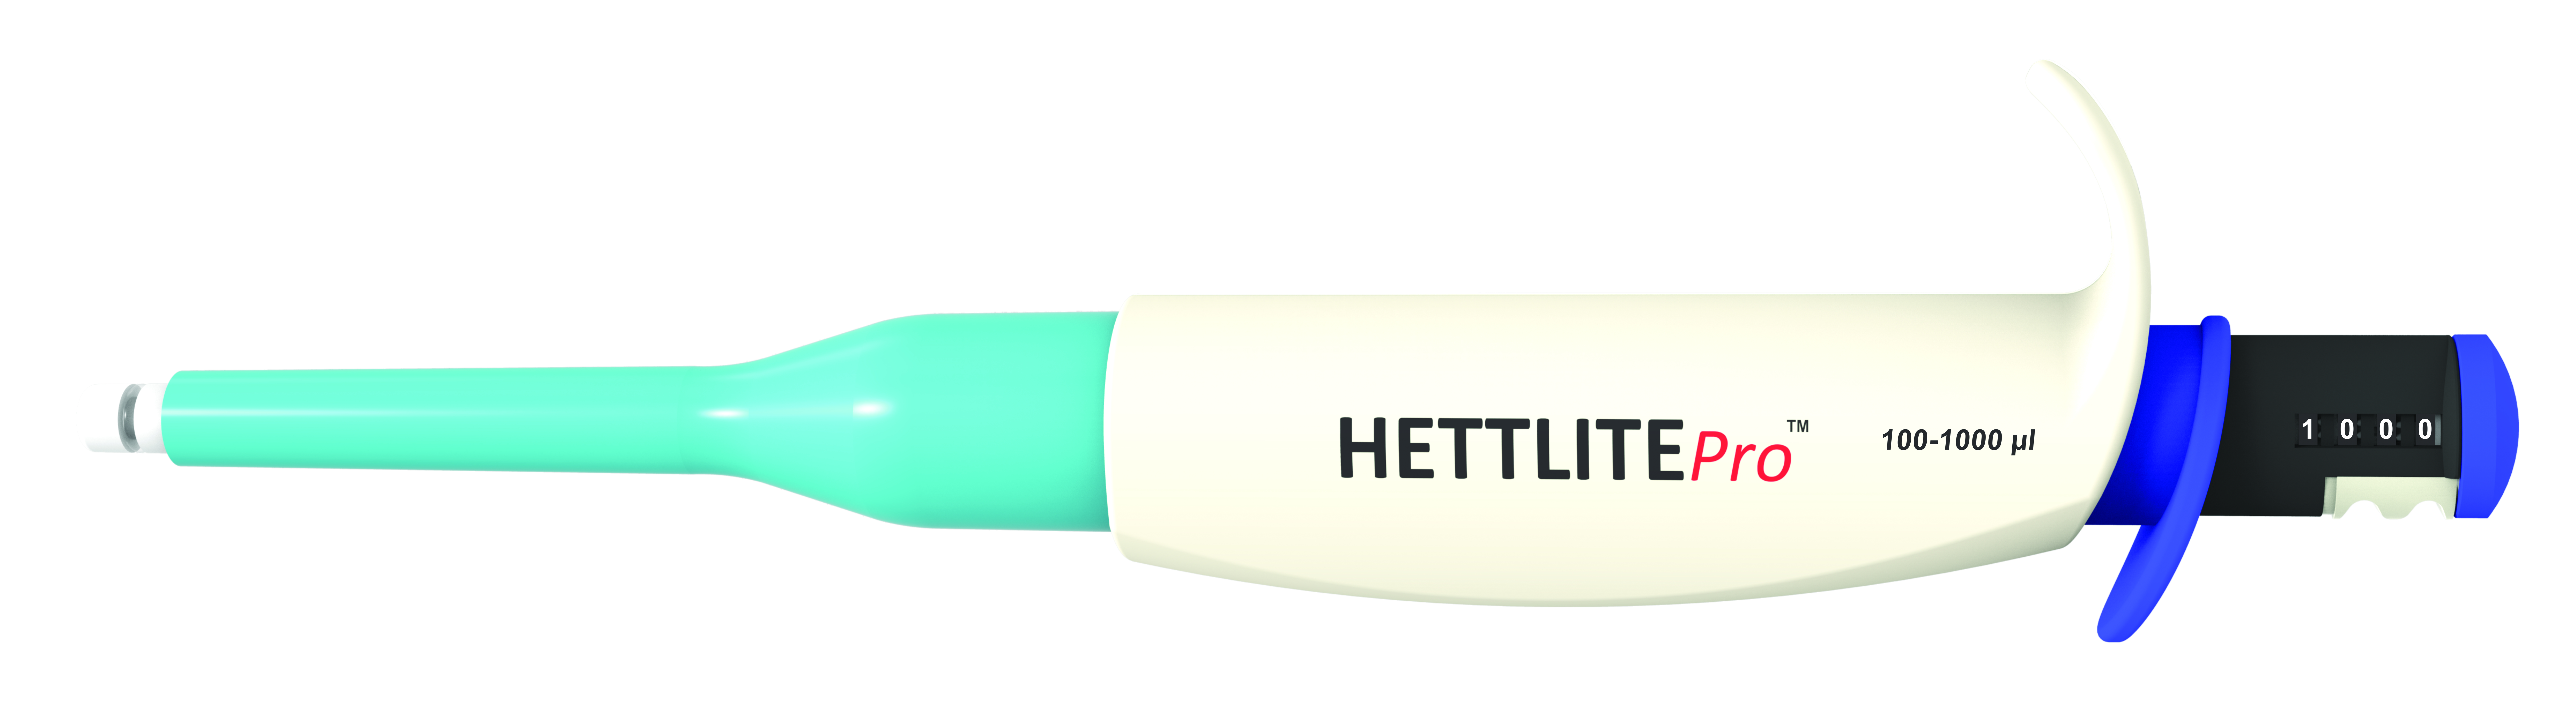 HettlitePro Single Channel Pipette: The Benefits of Using One